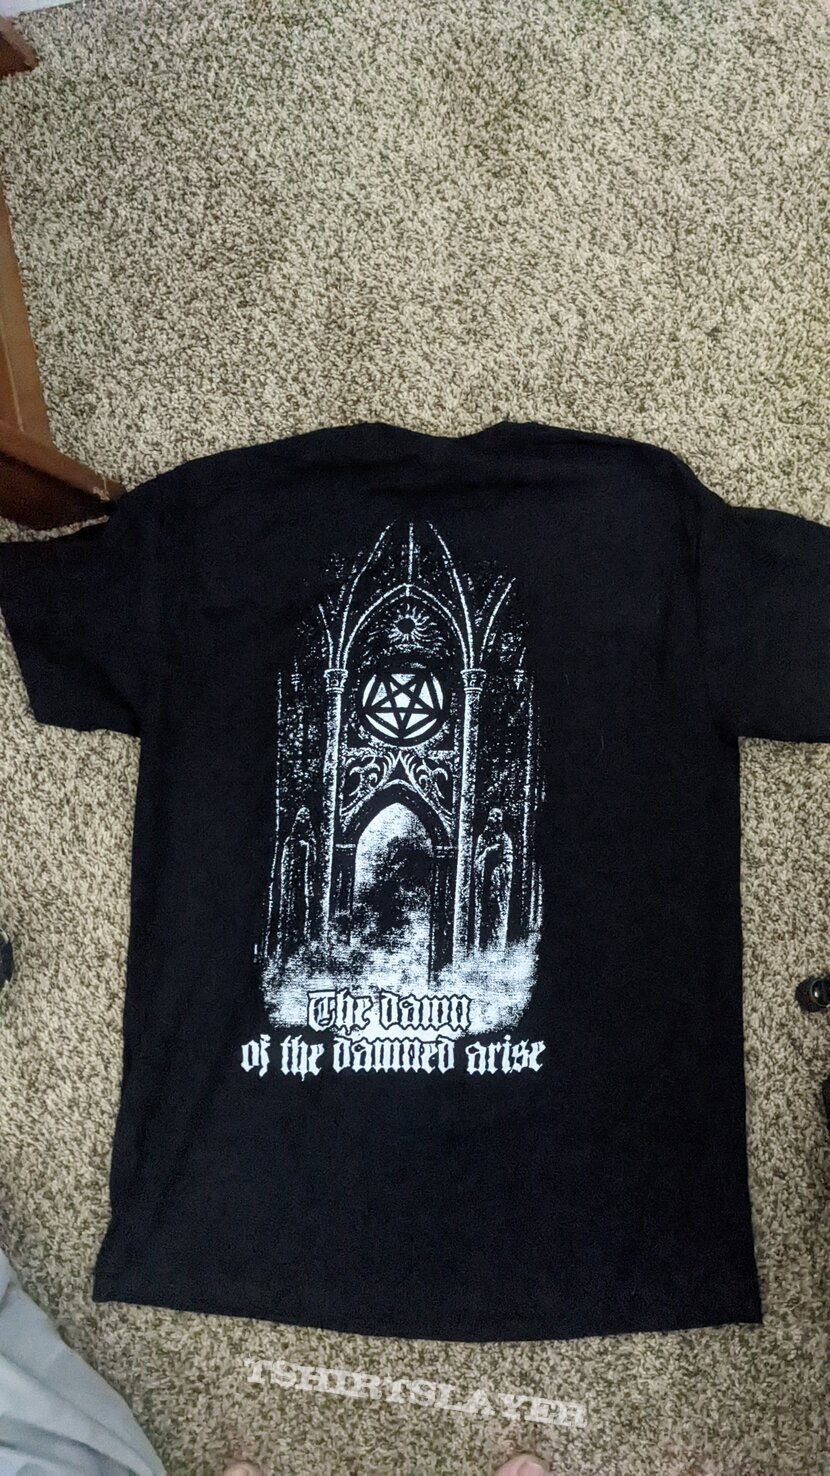 Necrophobic - Dawn of the Damned shirt